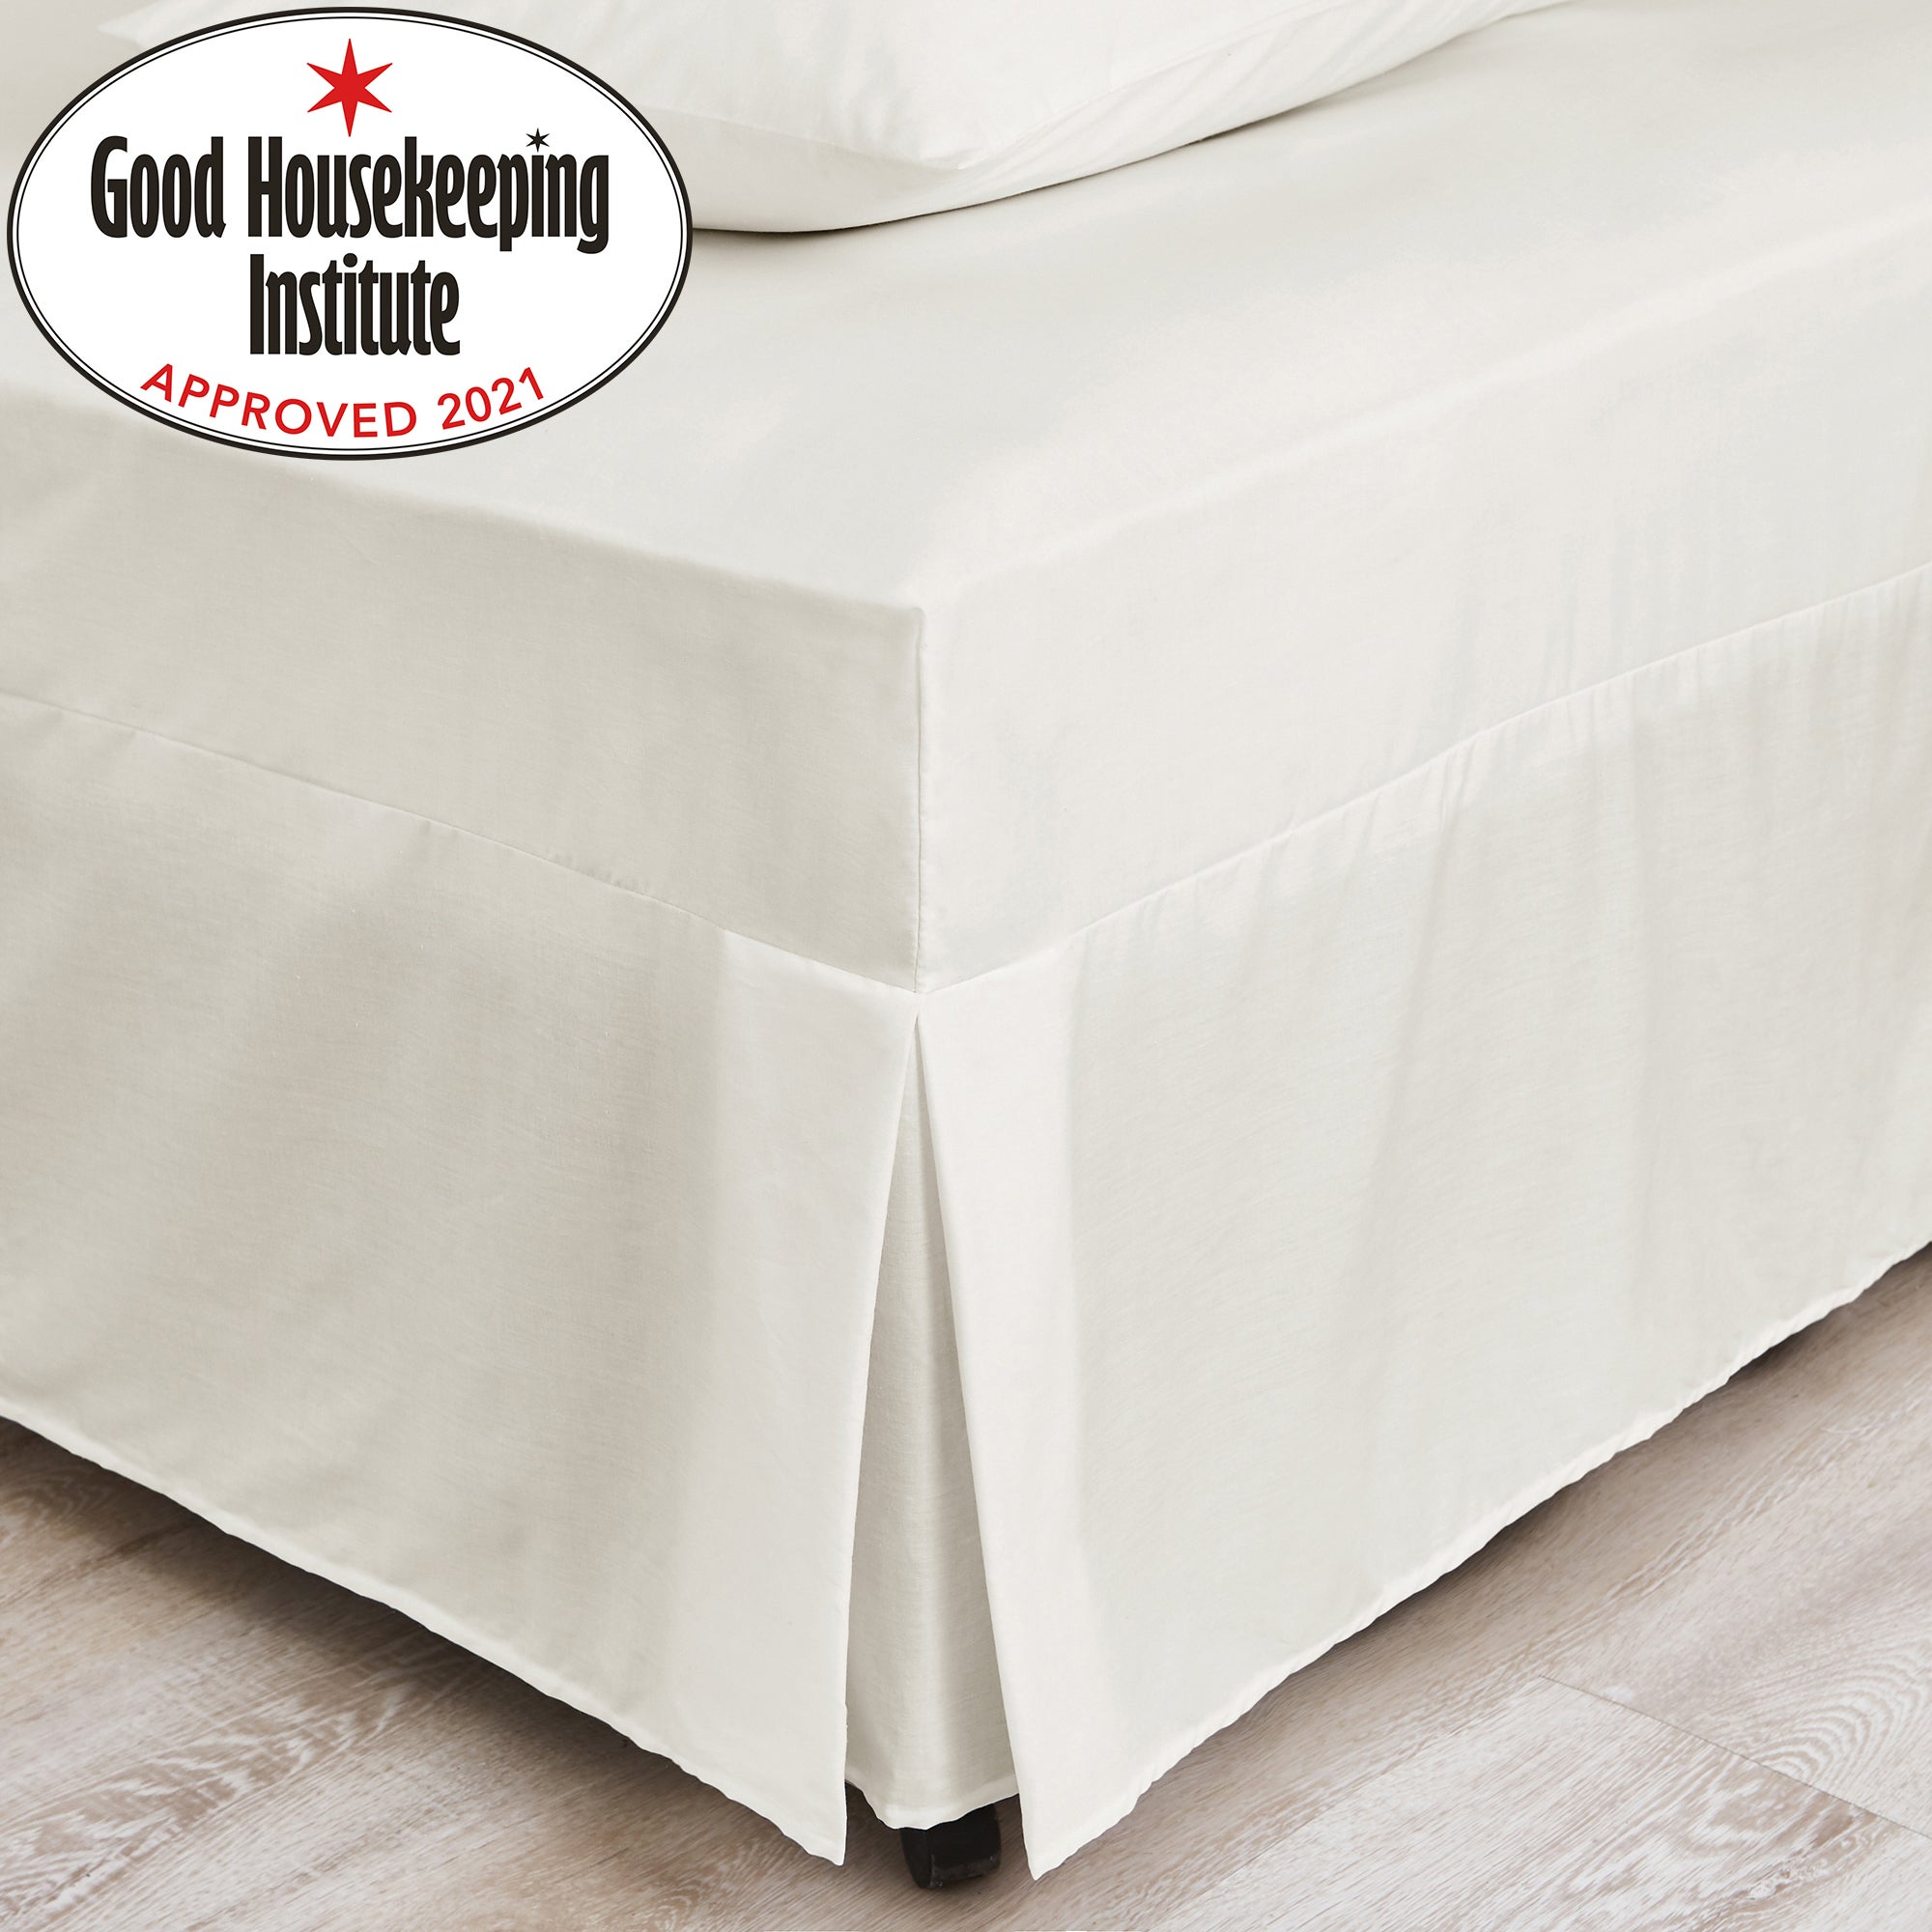 Non Iron Plain Dye Ivory Fitted Valance Sheet